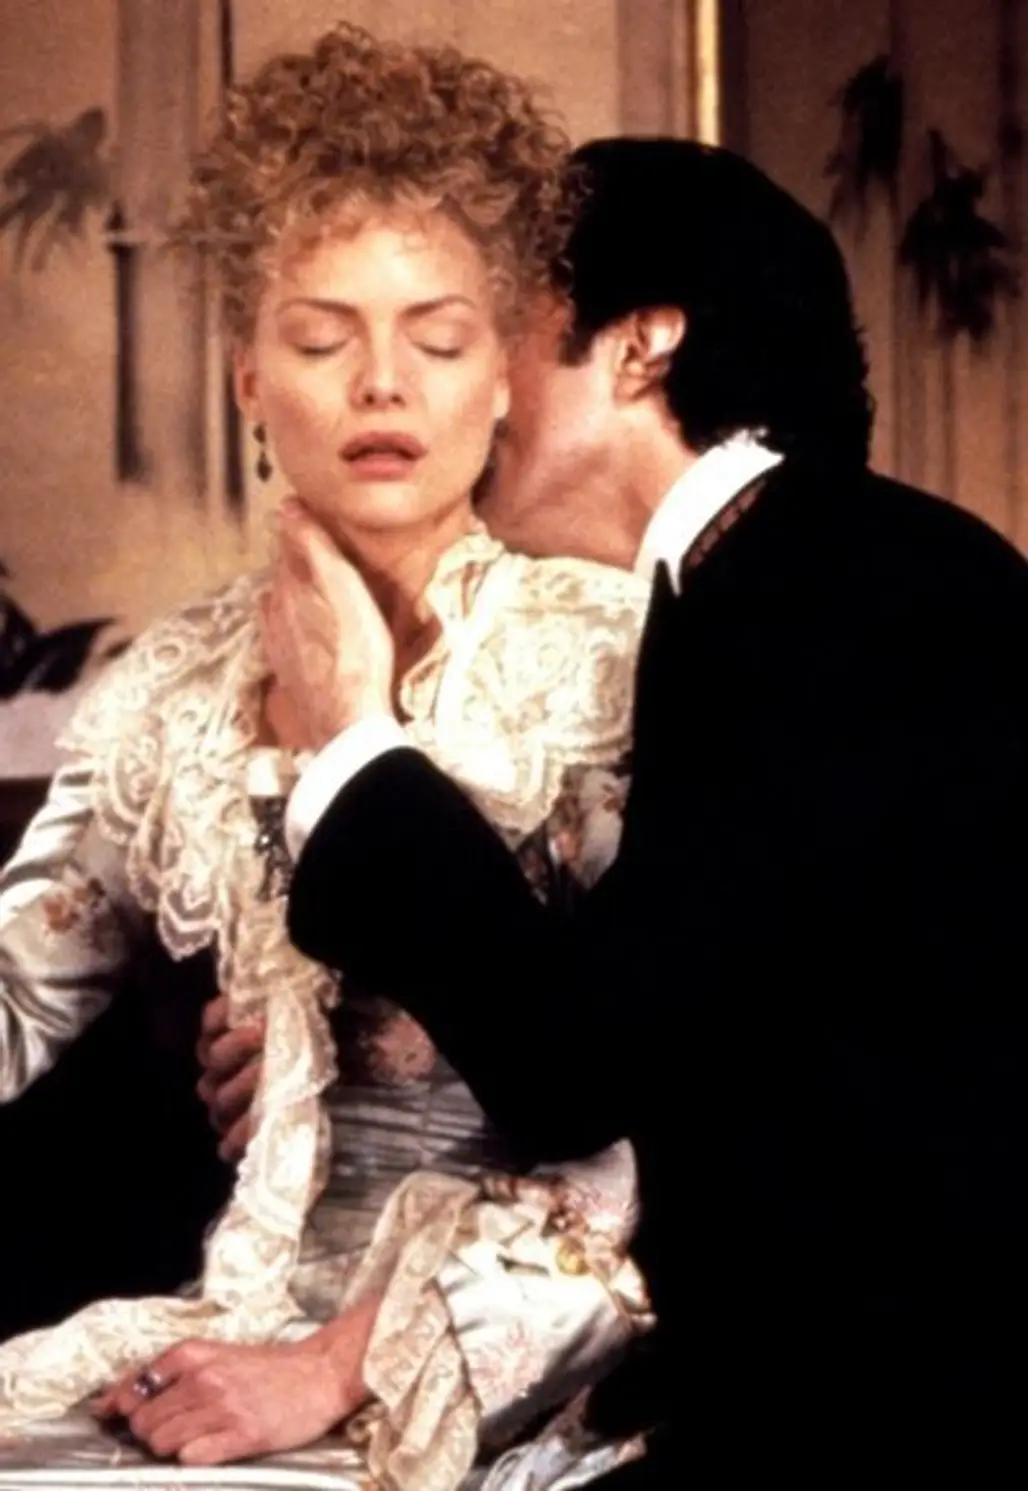 Newland and Ellen, "the Age of Innocence"